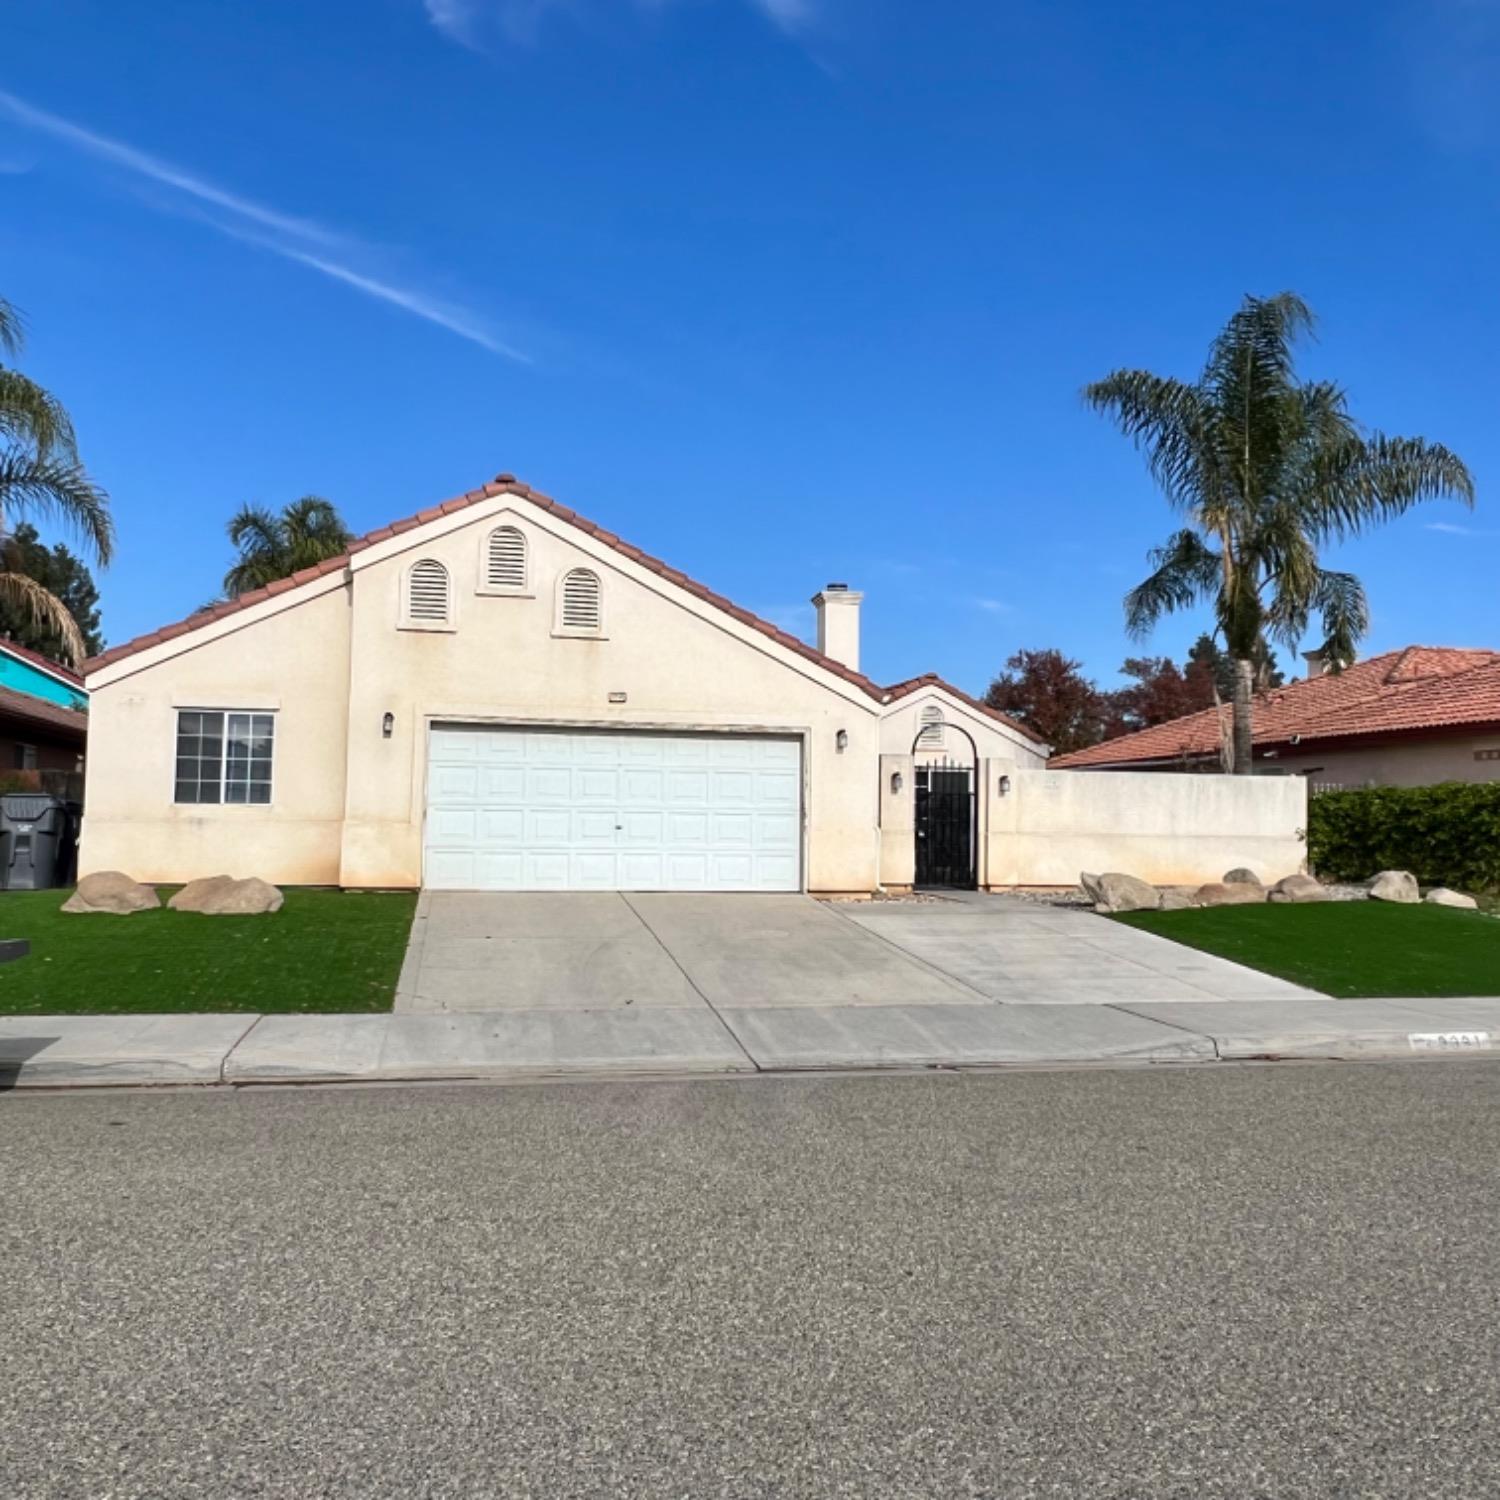 Photo of 3391 Kelsey Ln in Madera, CA